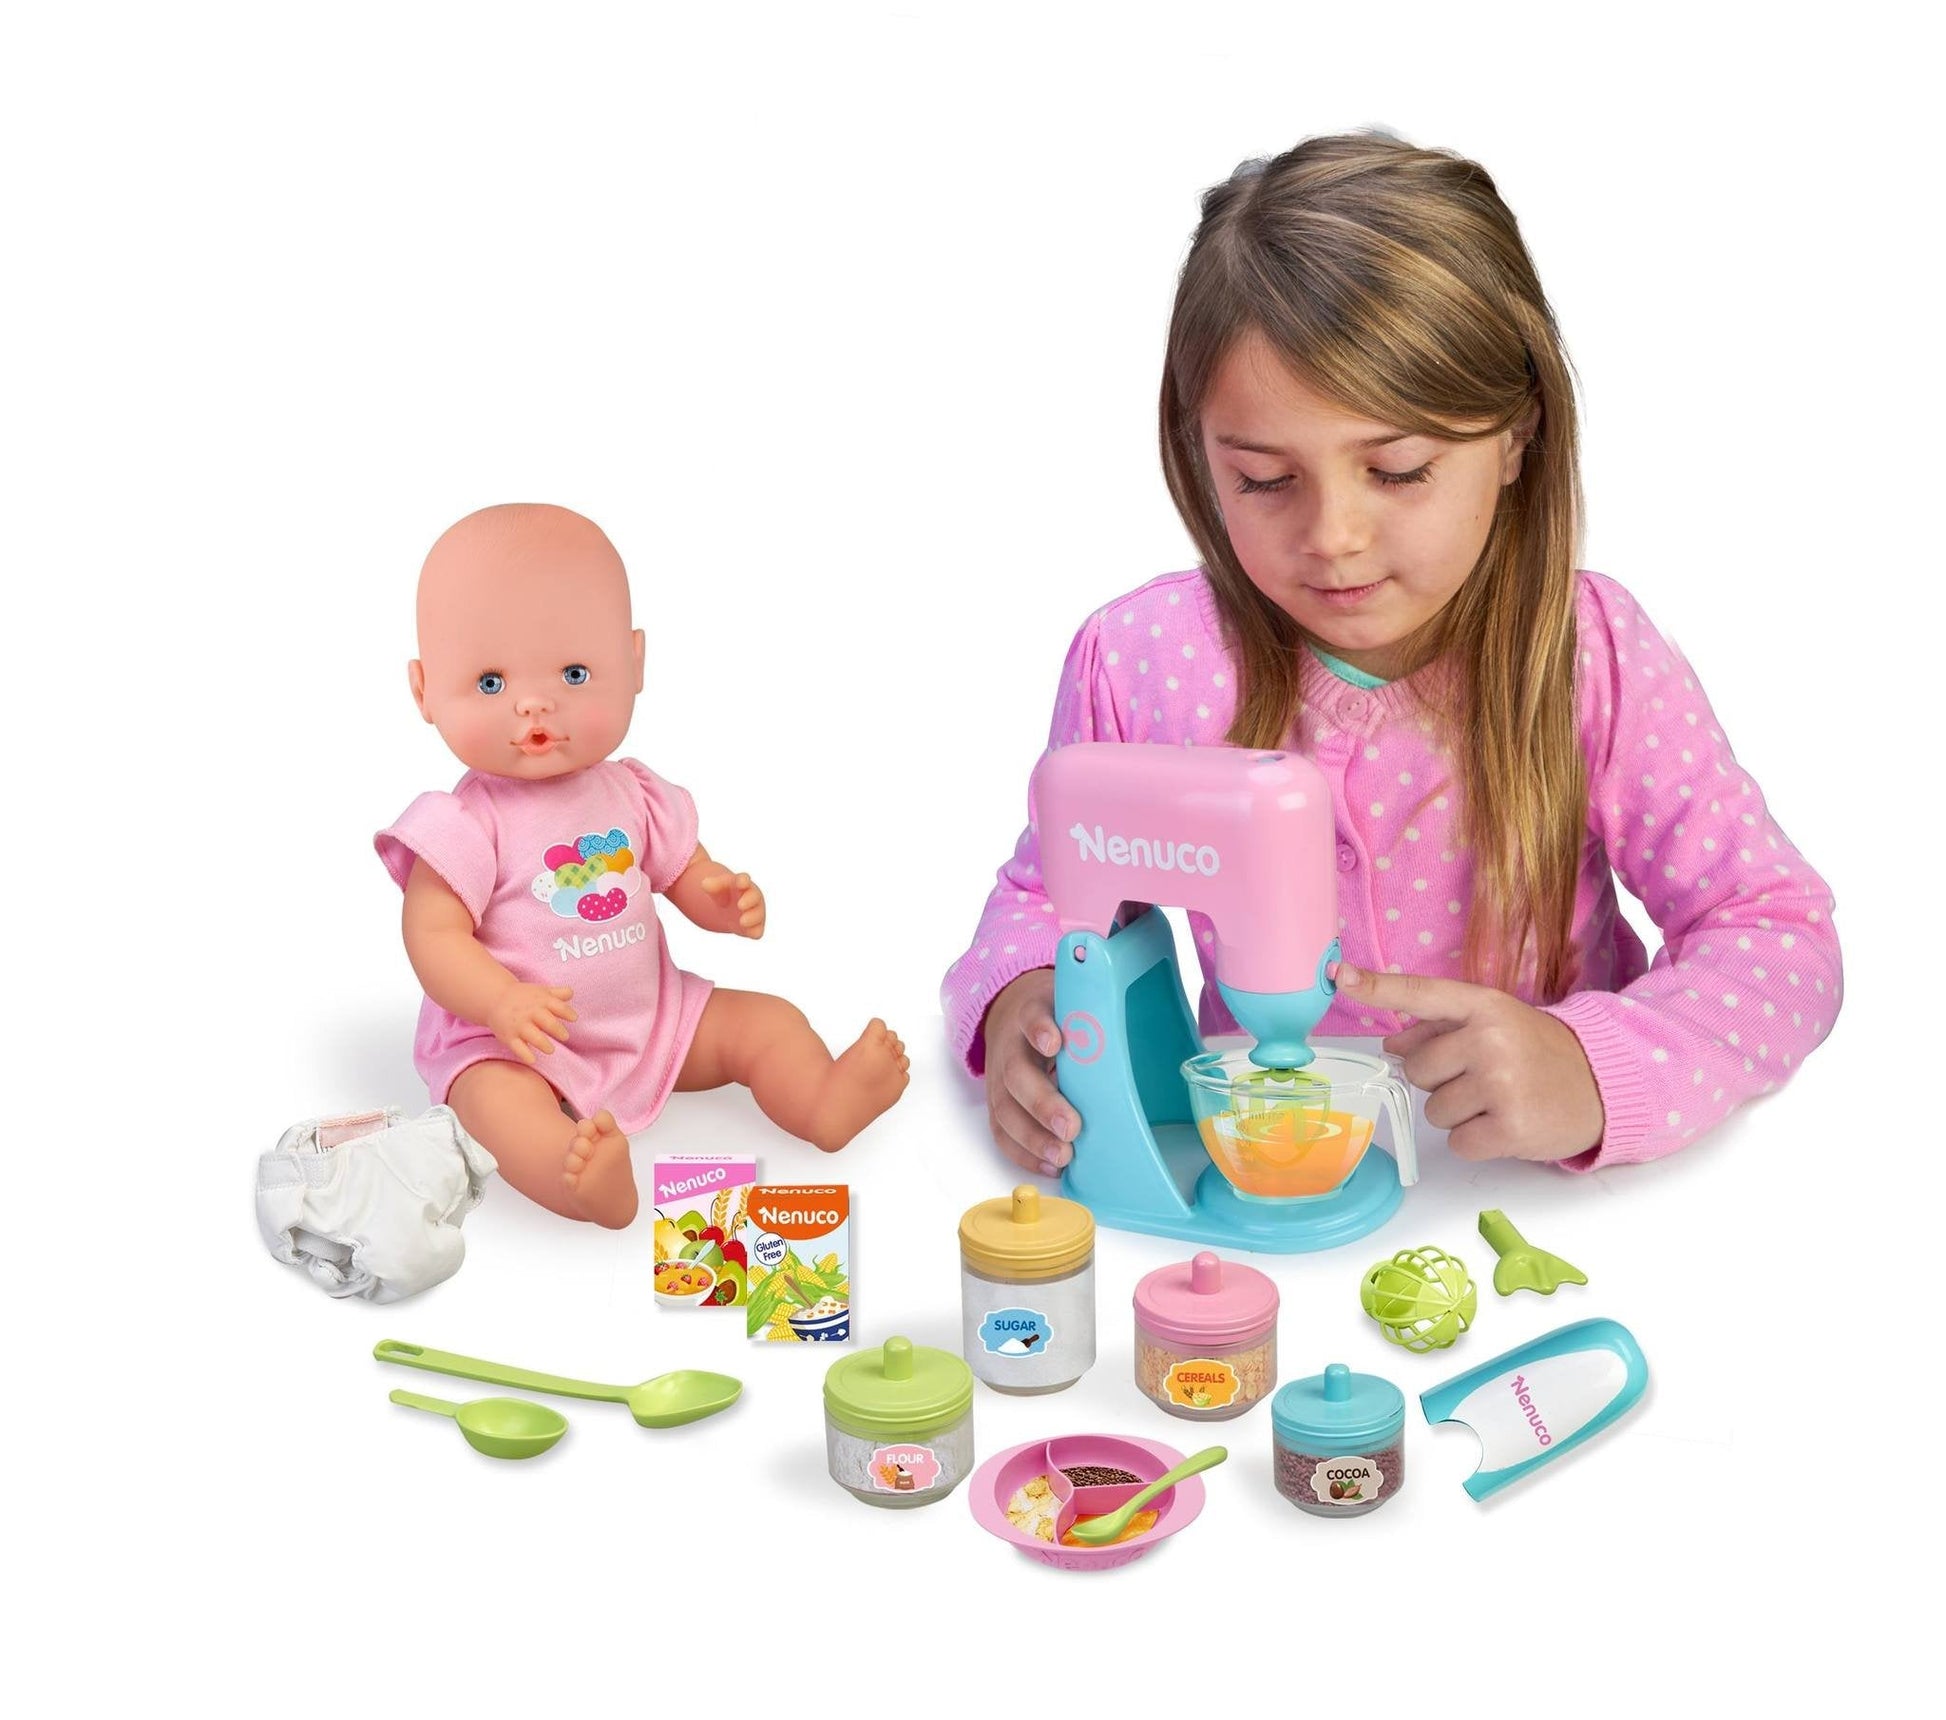  Nenuco Super Meals Baby Doll with Recipe Book, Kitchen